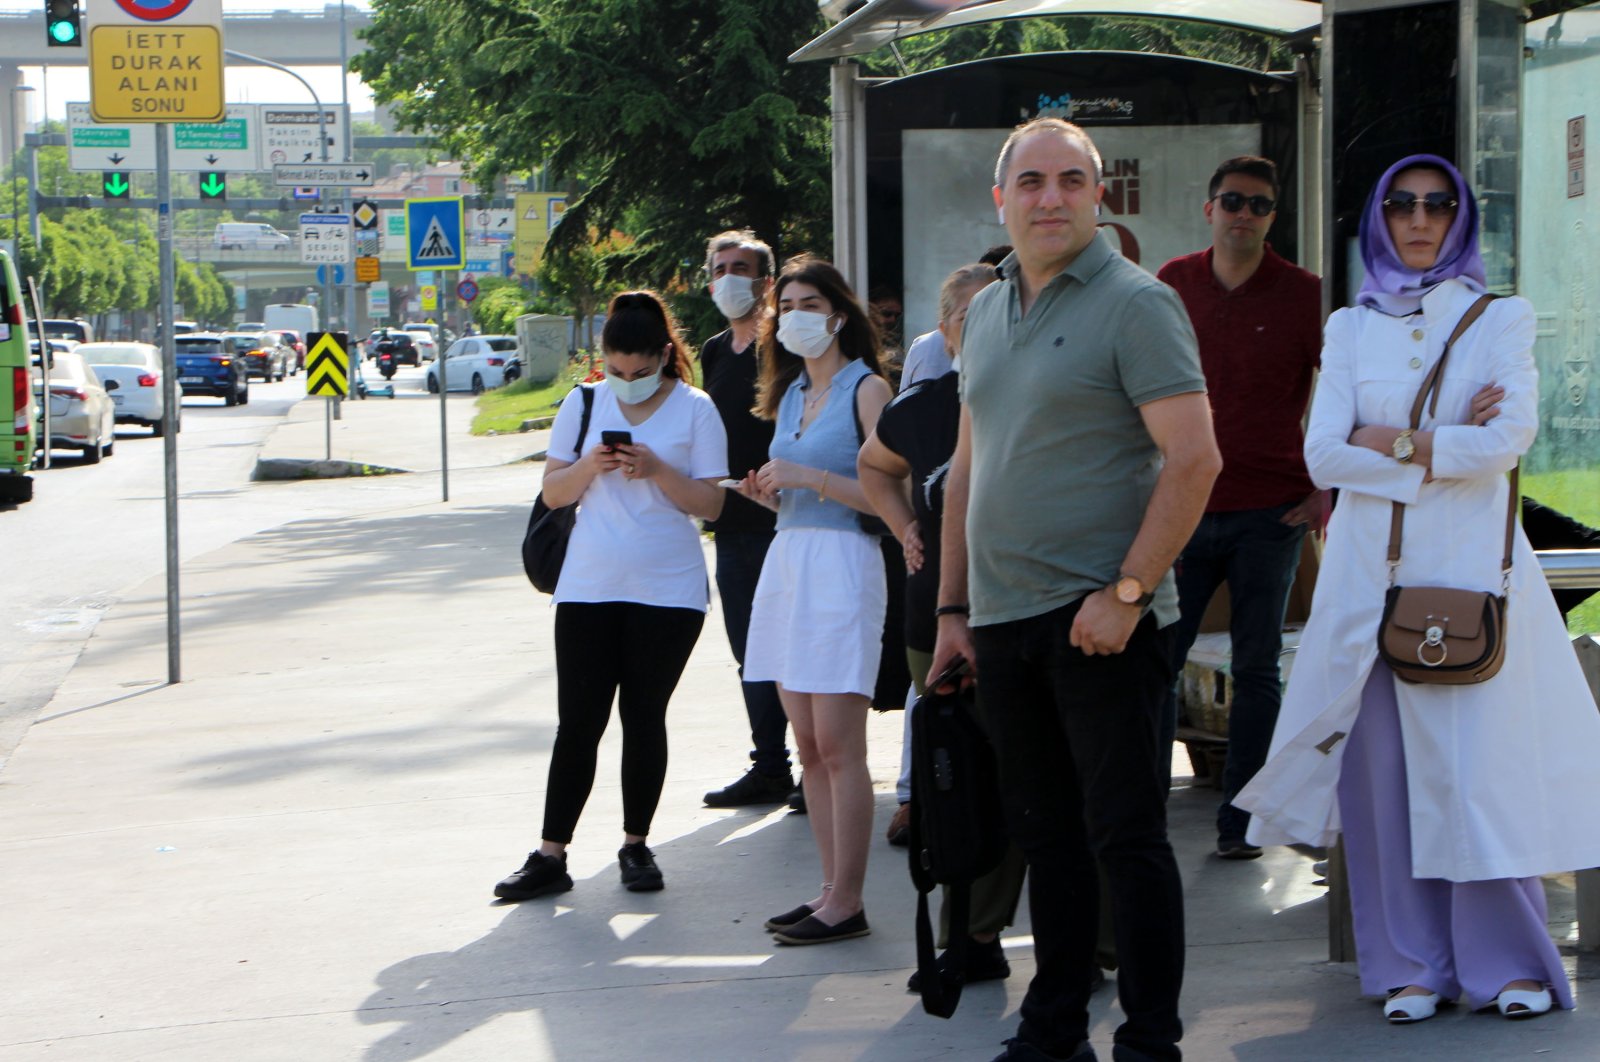 People with and without COVID-19 masks wait at a bus stop, in Istanbul, Turkey, May 30, 2022. (DHA PHOTO) 